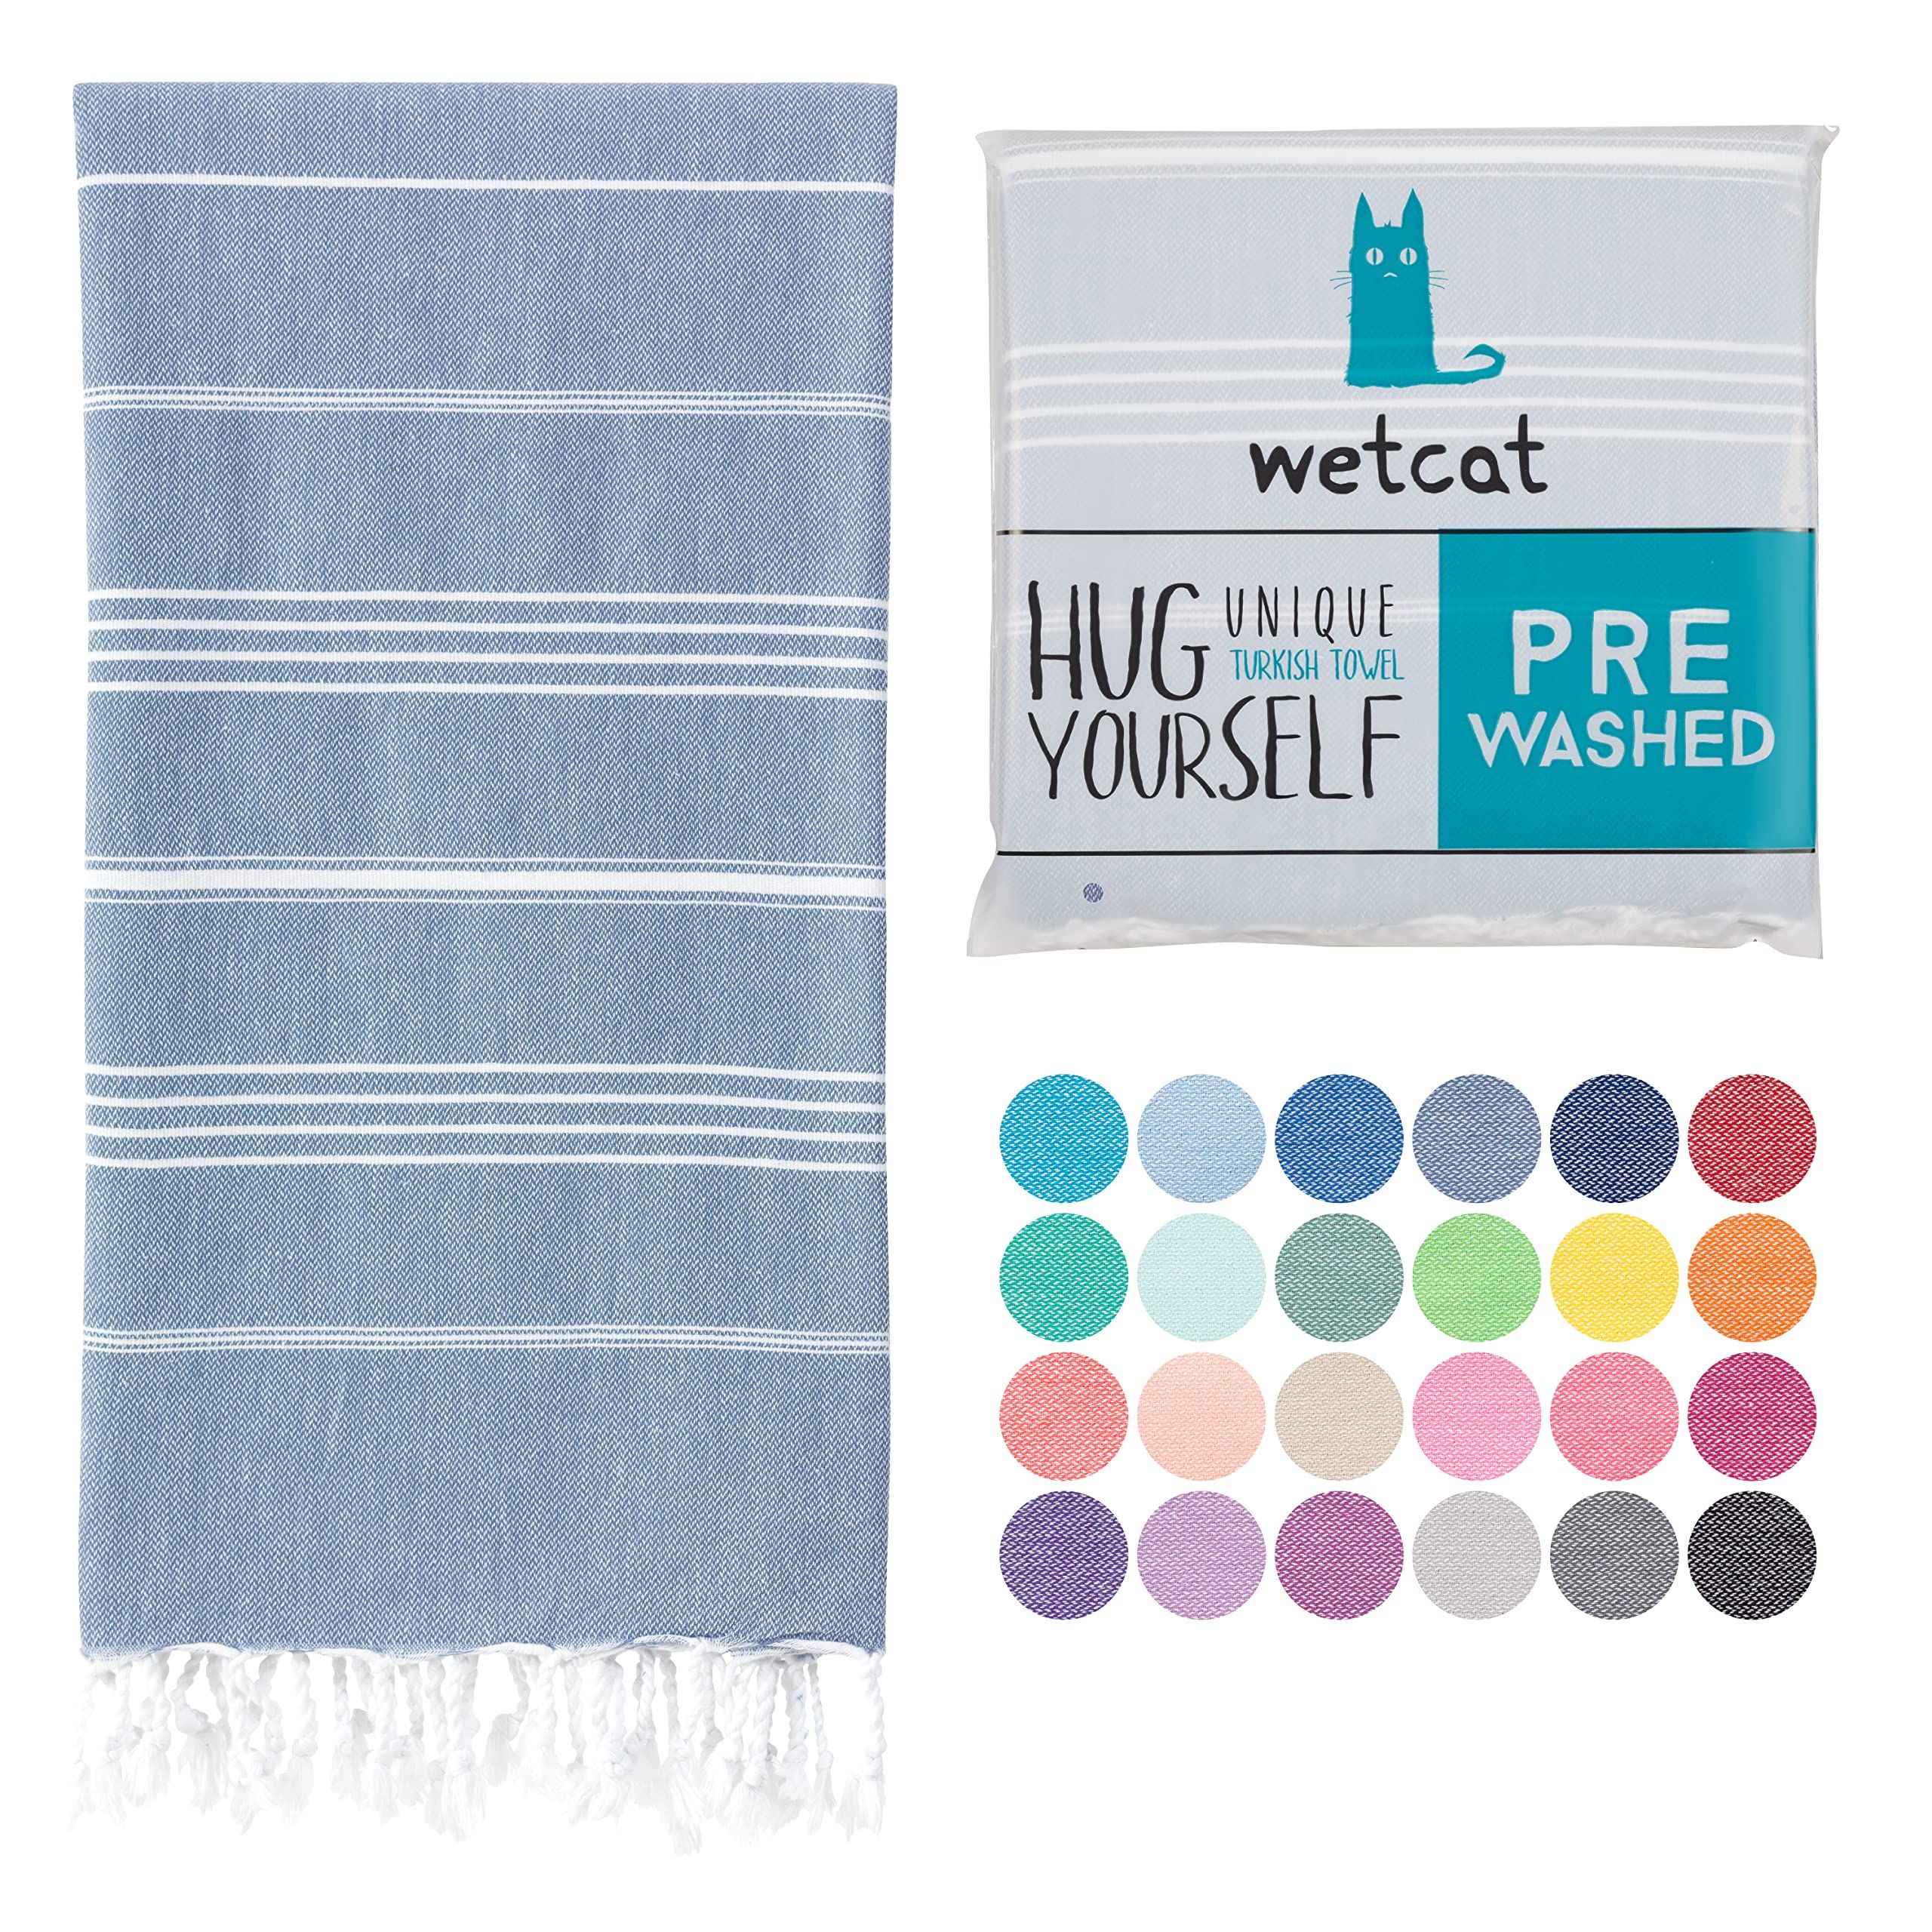 WETCAT Turkish Beach Towel (38 x 71) - Prewashed for Soft Feel, 100% Cotton - Quick Dry Pool Towels  | Amazon (US)